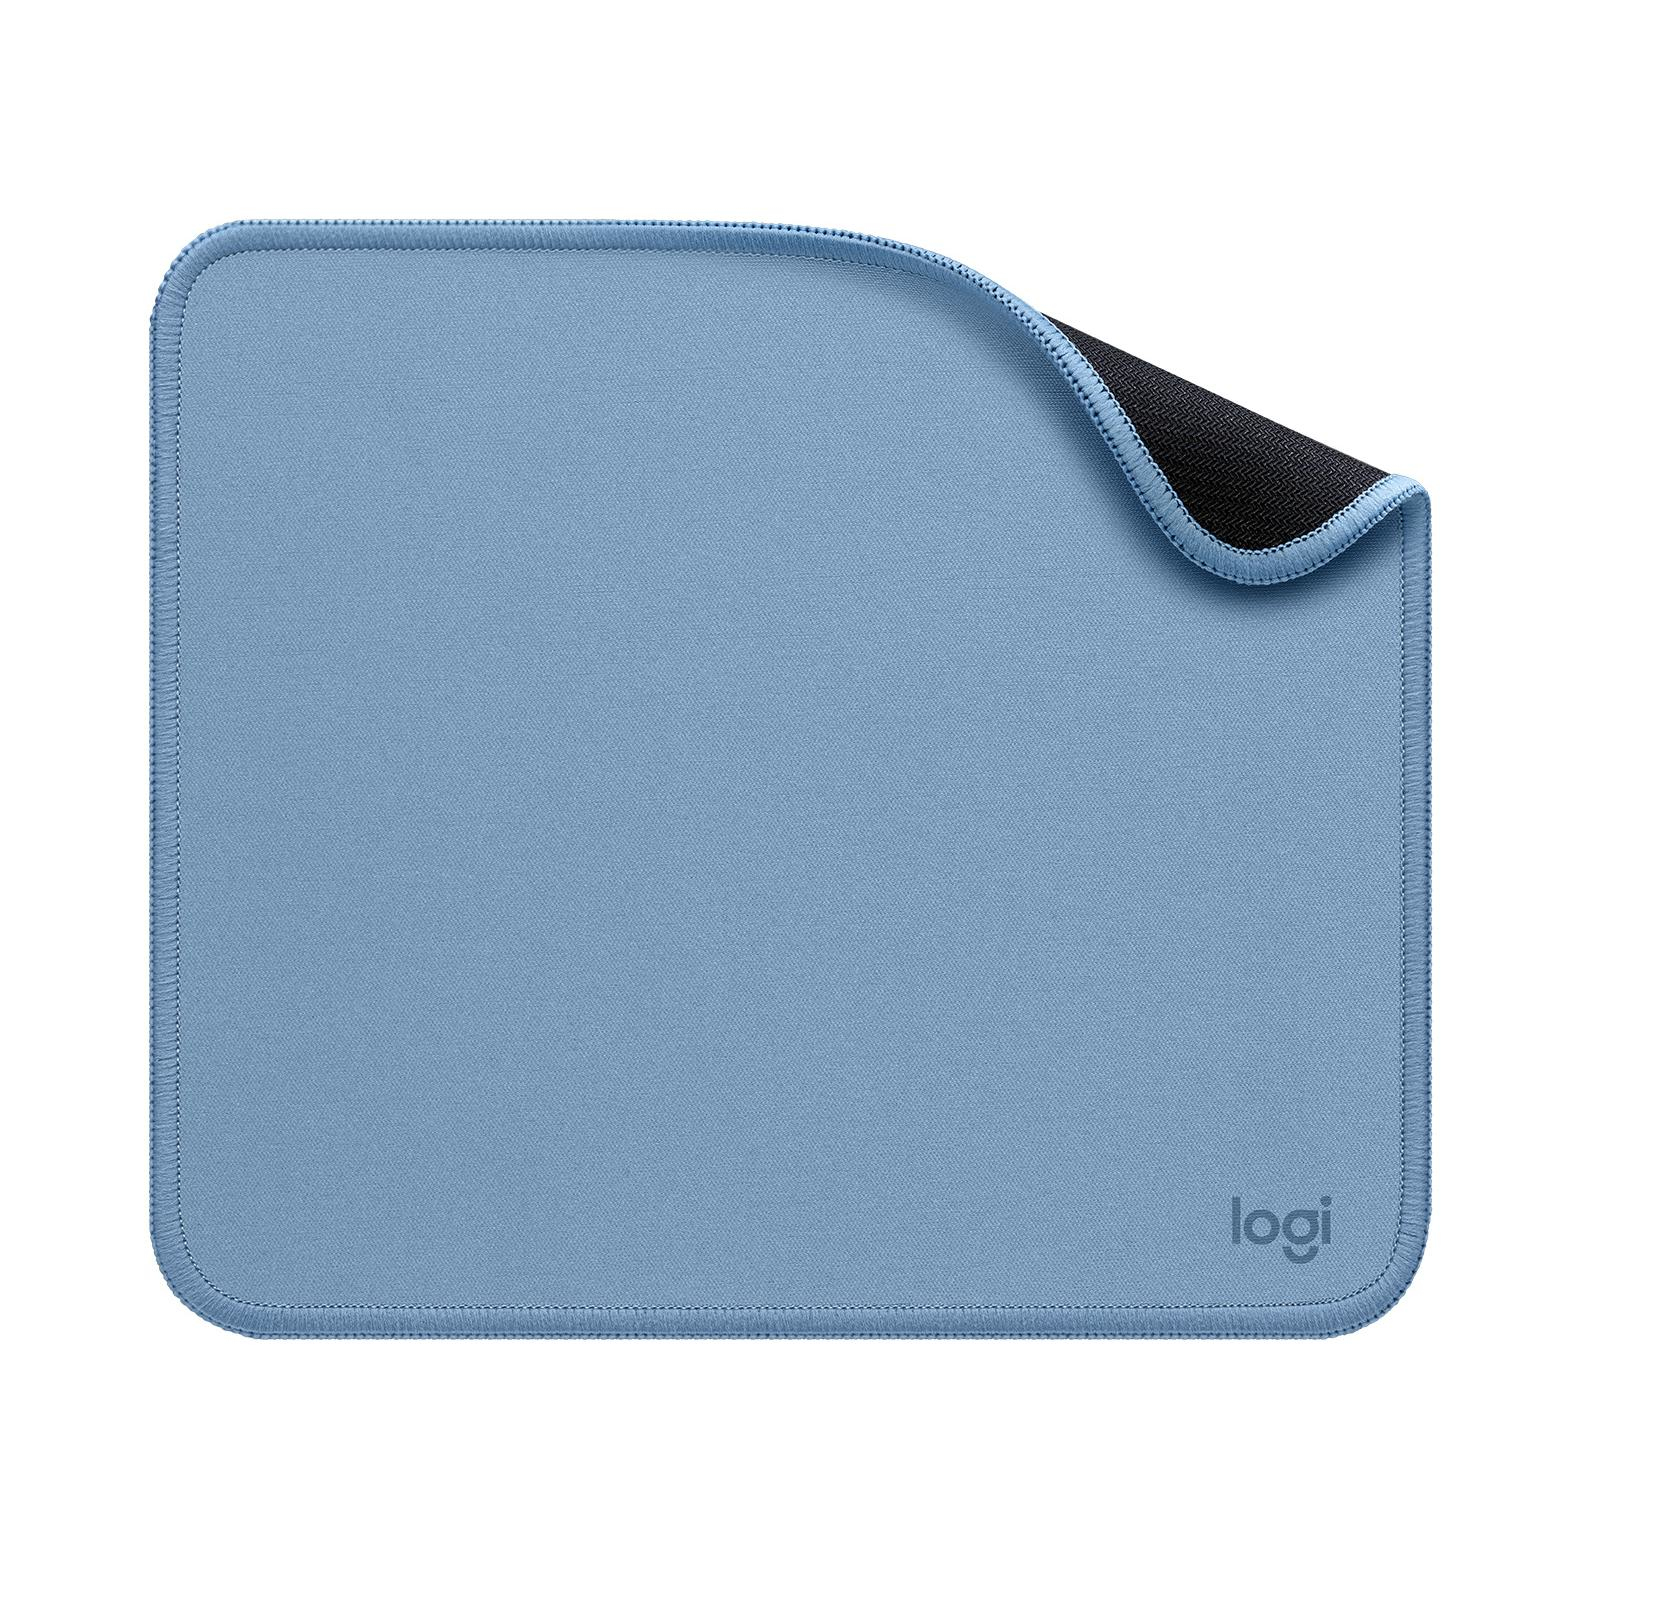 You Recently Viewed Logitech Mouse Pad - Studio Series, Soft Mouse Pad Image